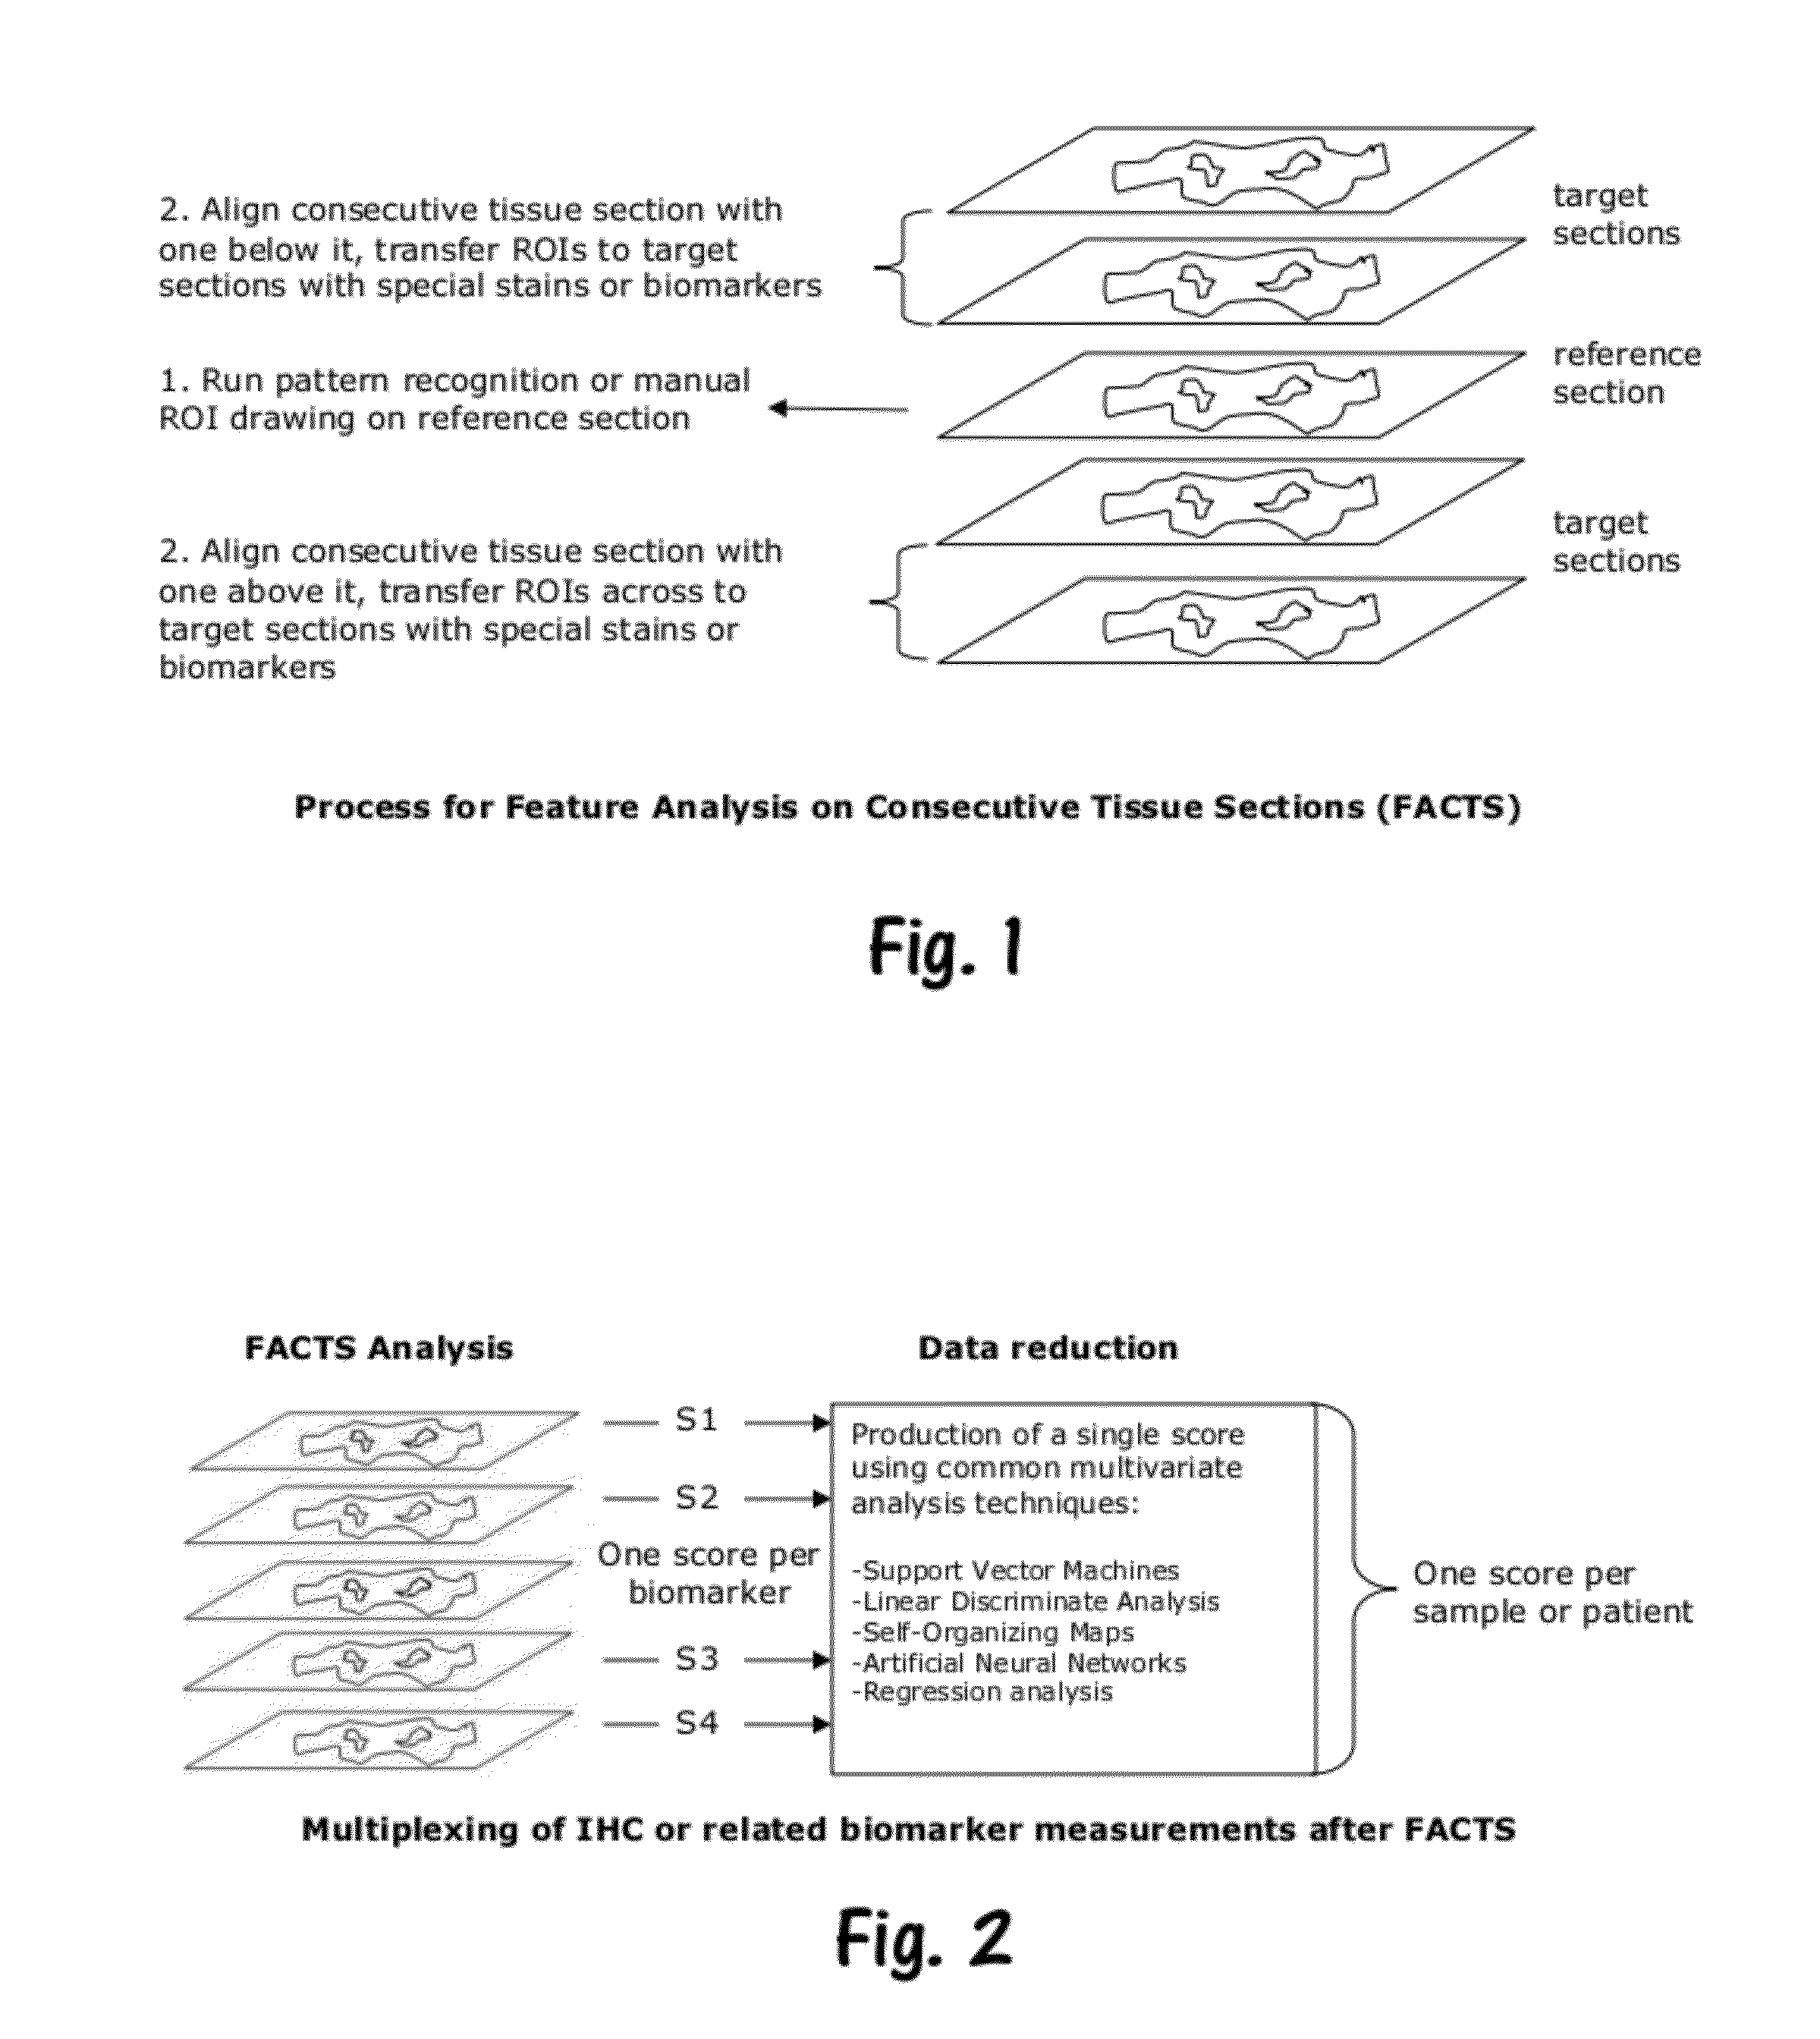 Methods for feature analysis on consecutive tissue sections